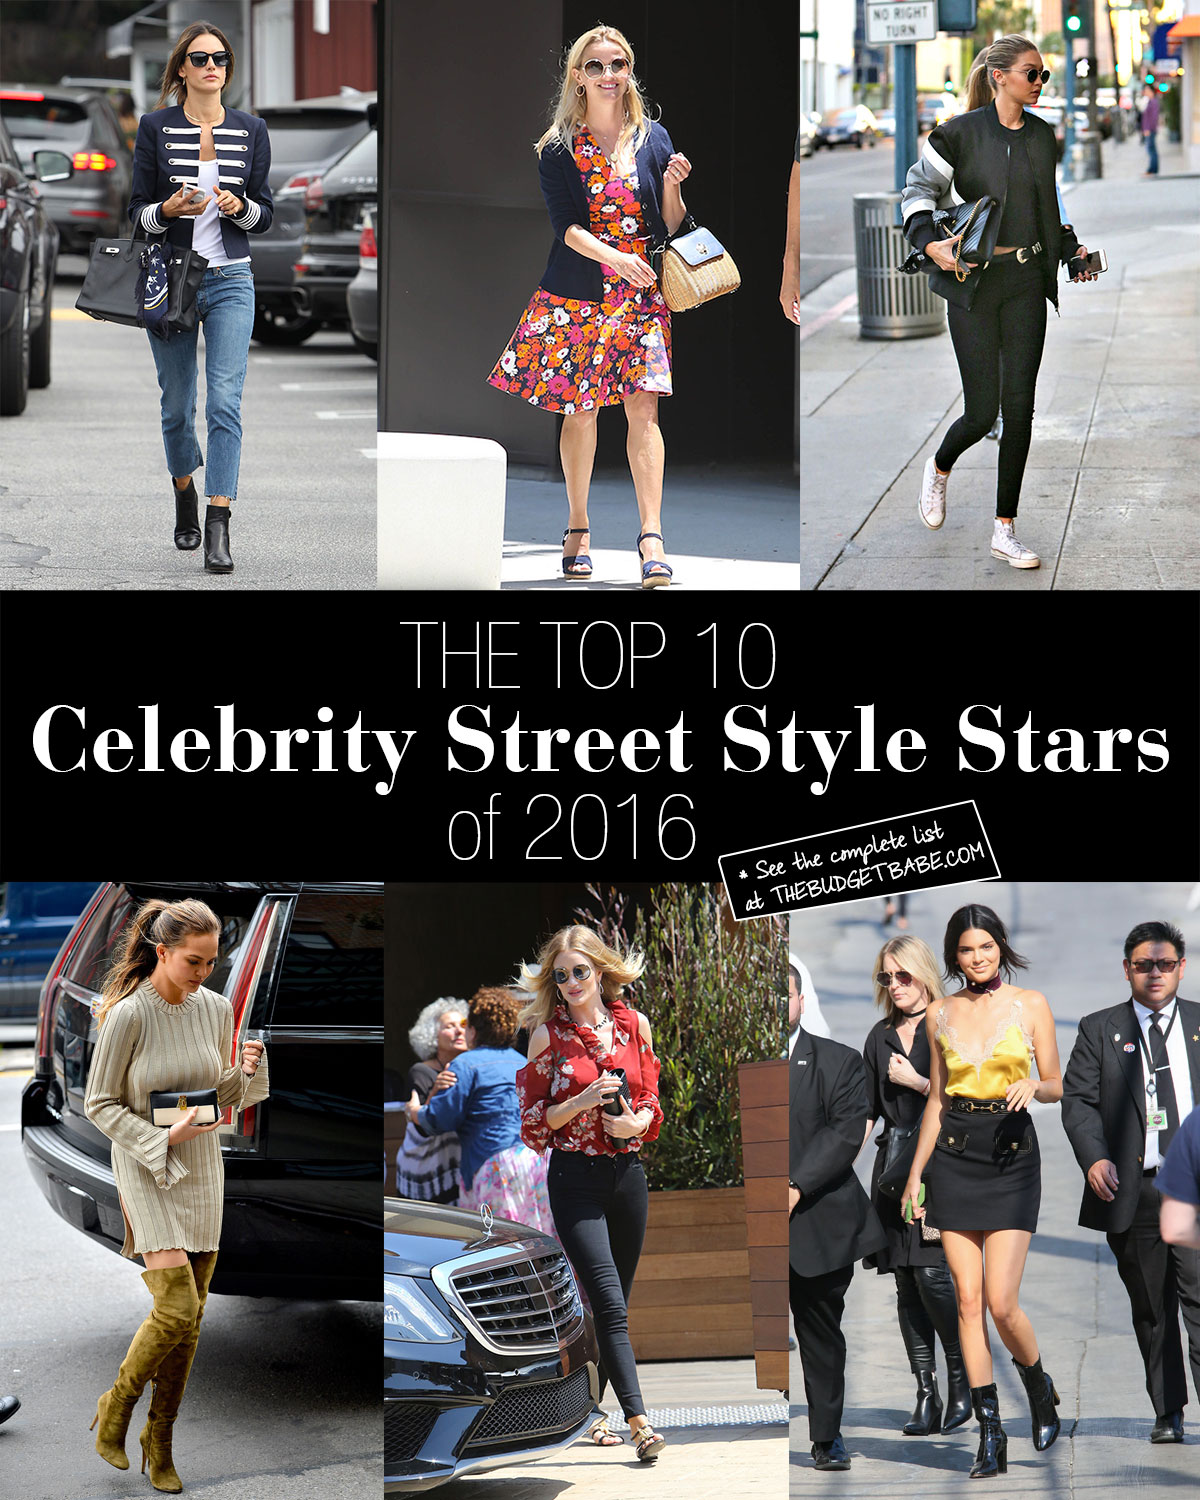 See which ten celebs topped our list of best-dressed street style stars in 2016.